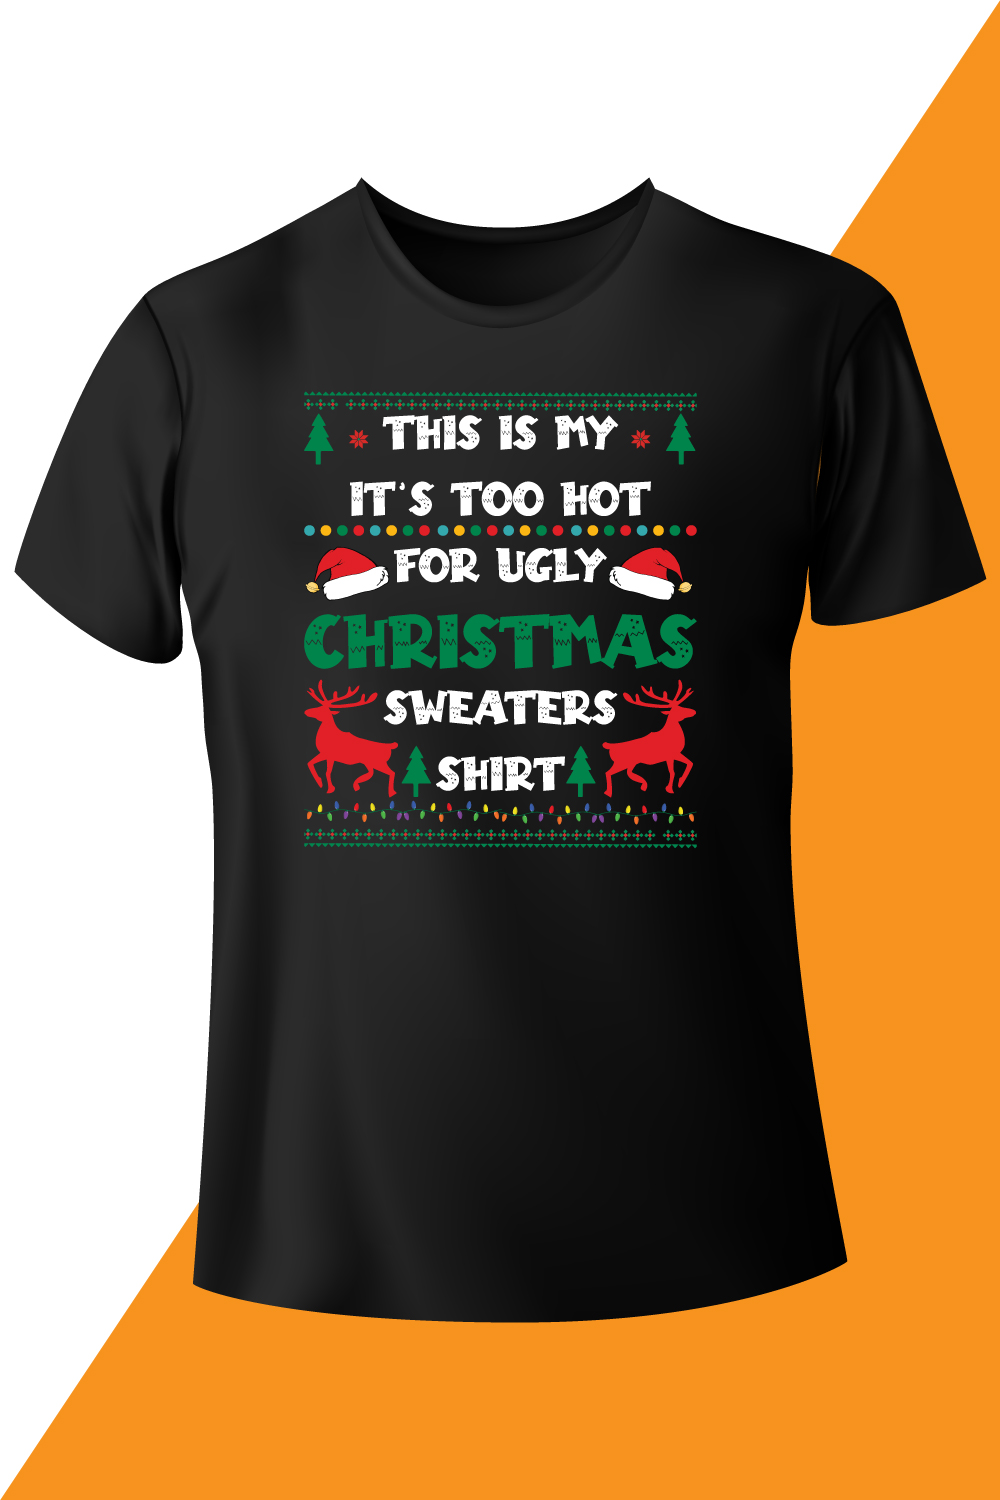 Image black t-shirts with amazing inscription this is my it's too hot for ugly christmas sweaters shirt.